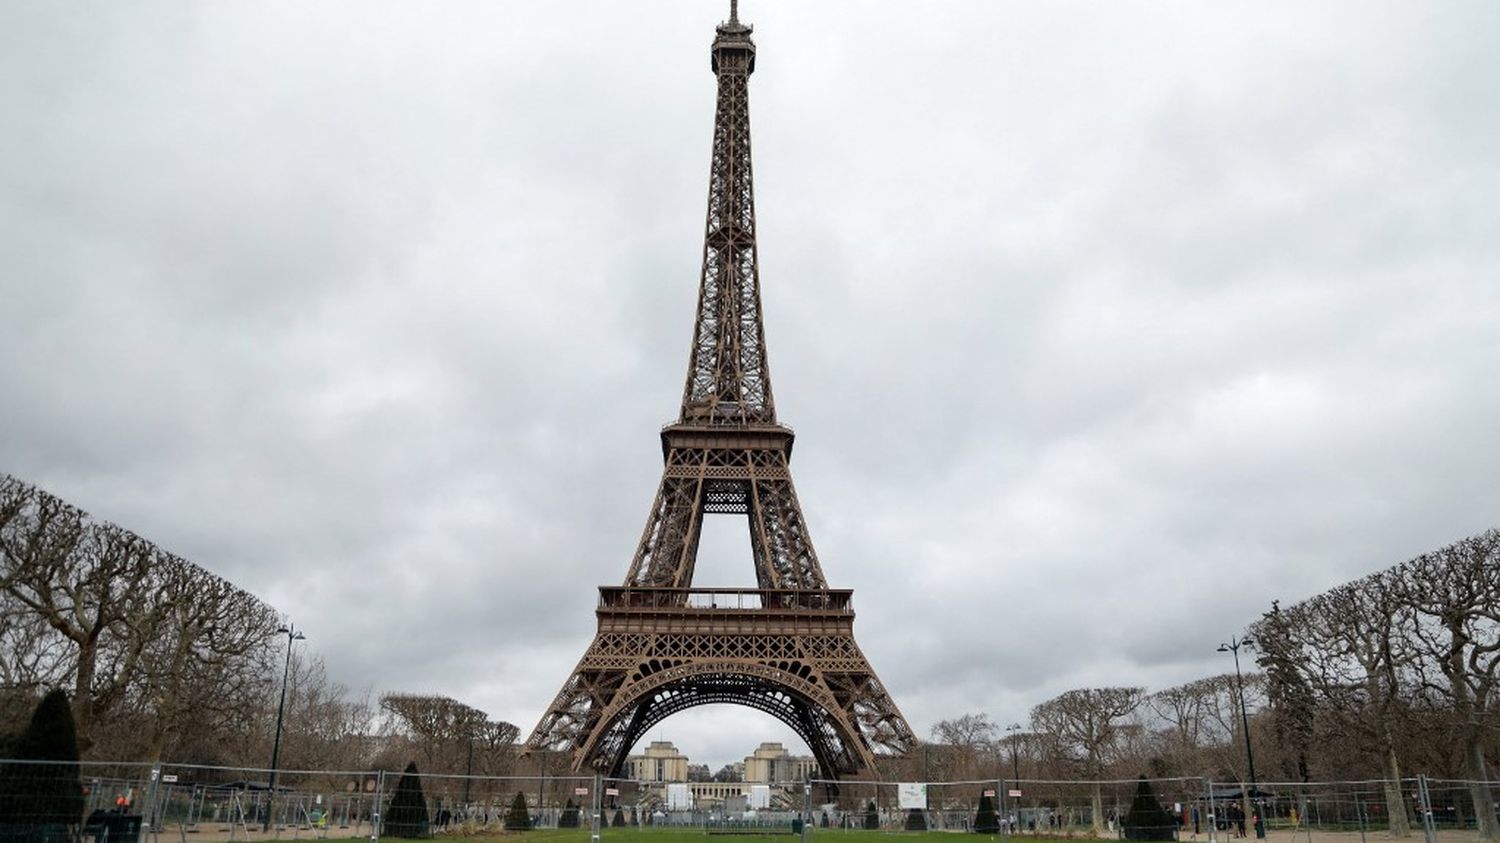 100,000 entries lost in six days of Eiffel Tower closure, according to operating company